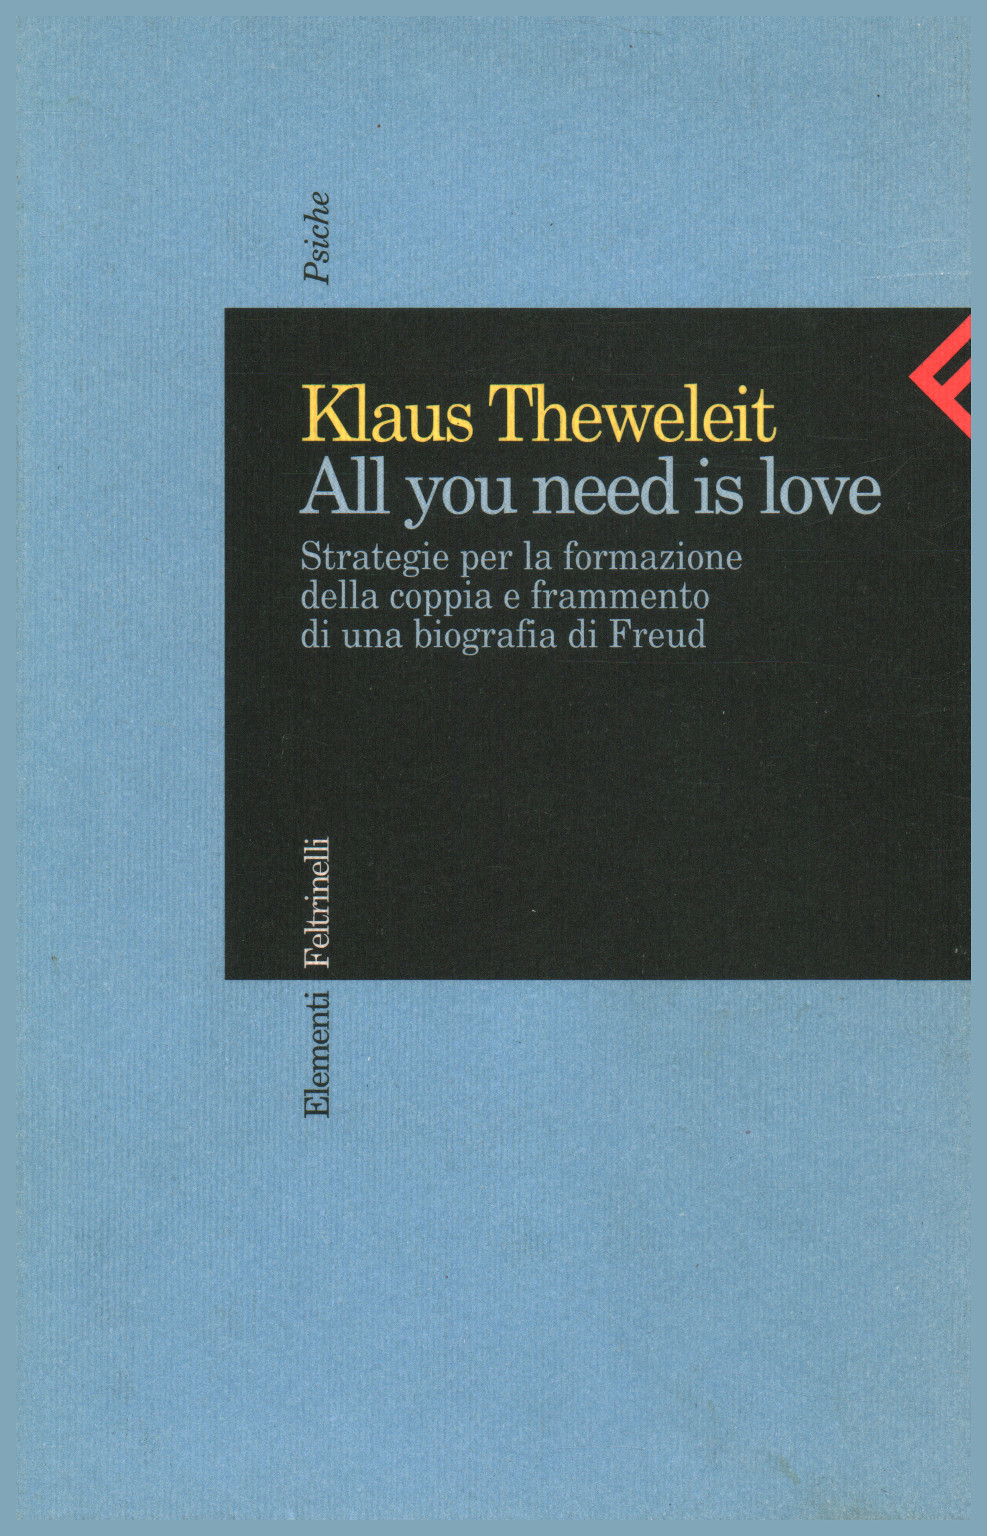 All you need is love", s.zu.